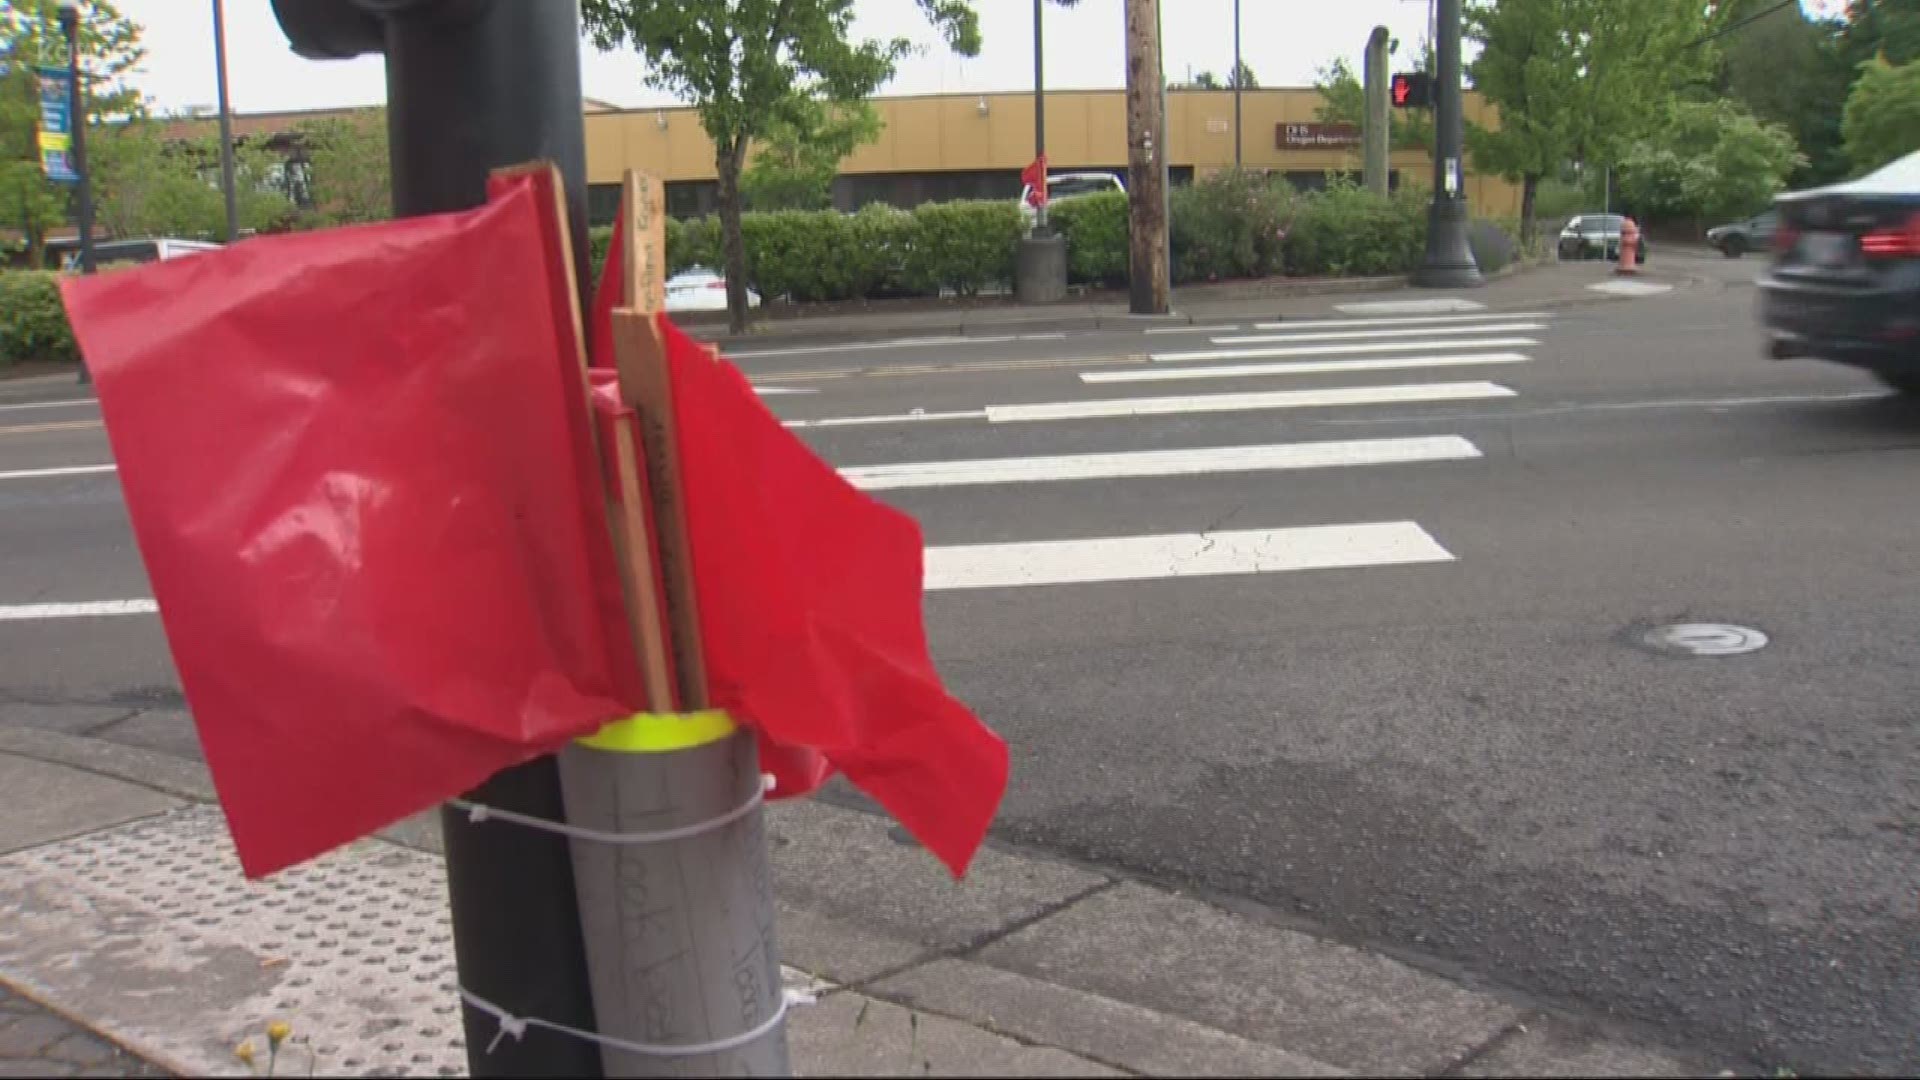 Police say distracted drivers caused two recent accidents at the same Oregon City intersection— one of them deadly.